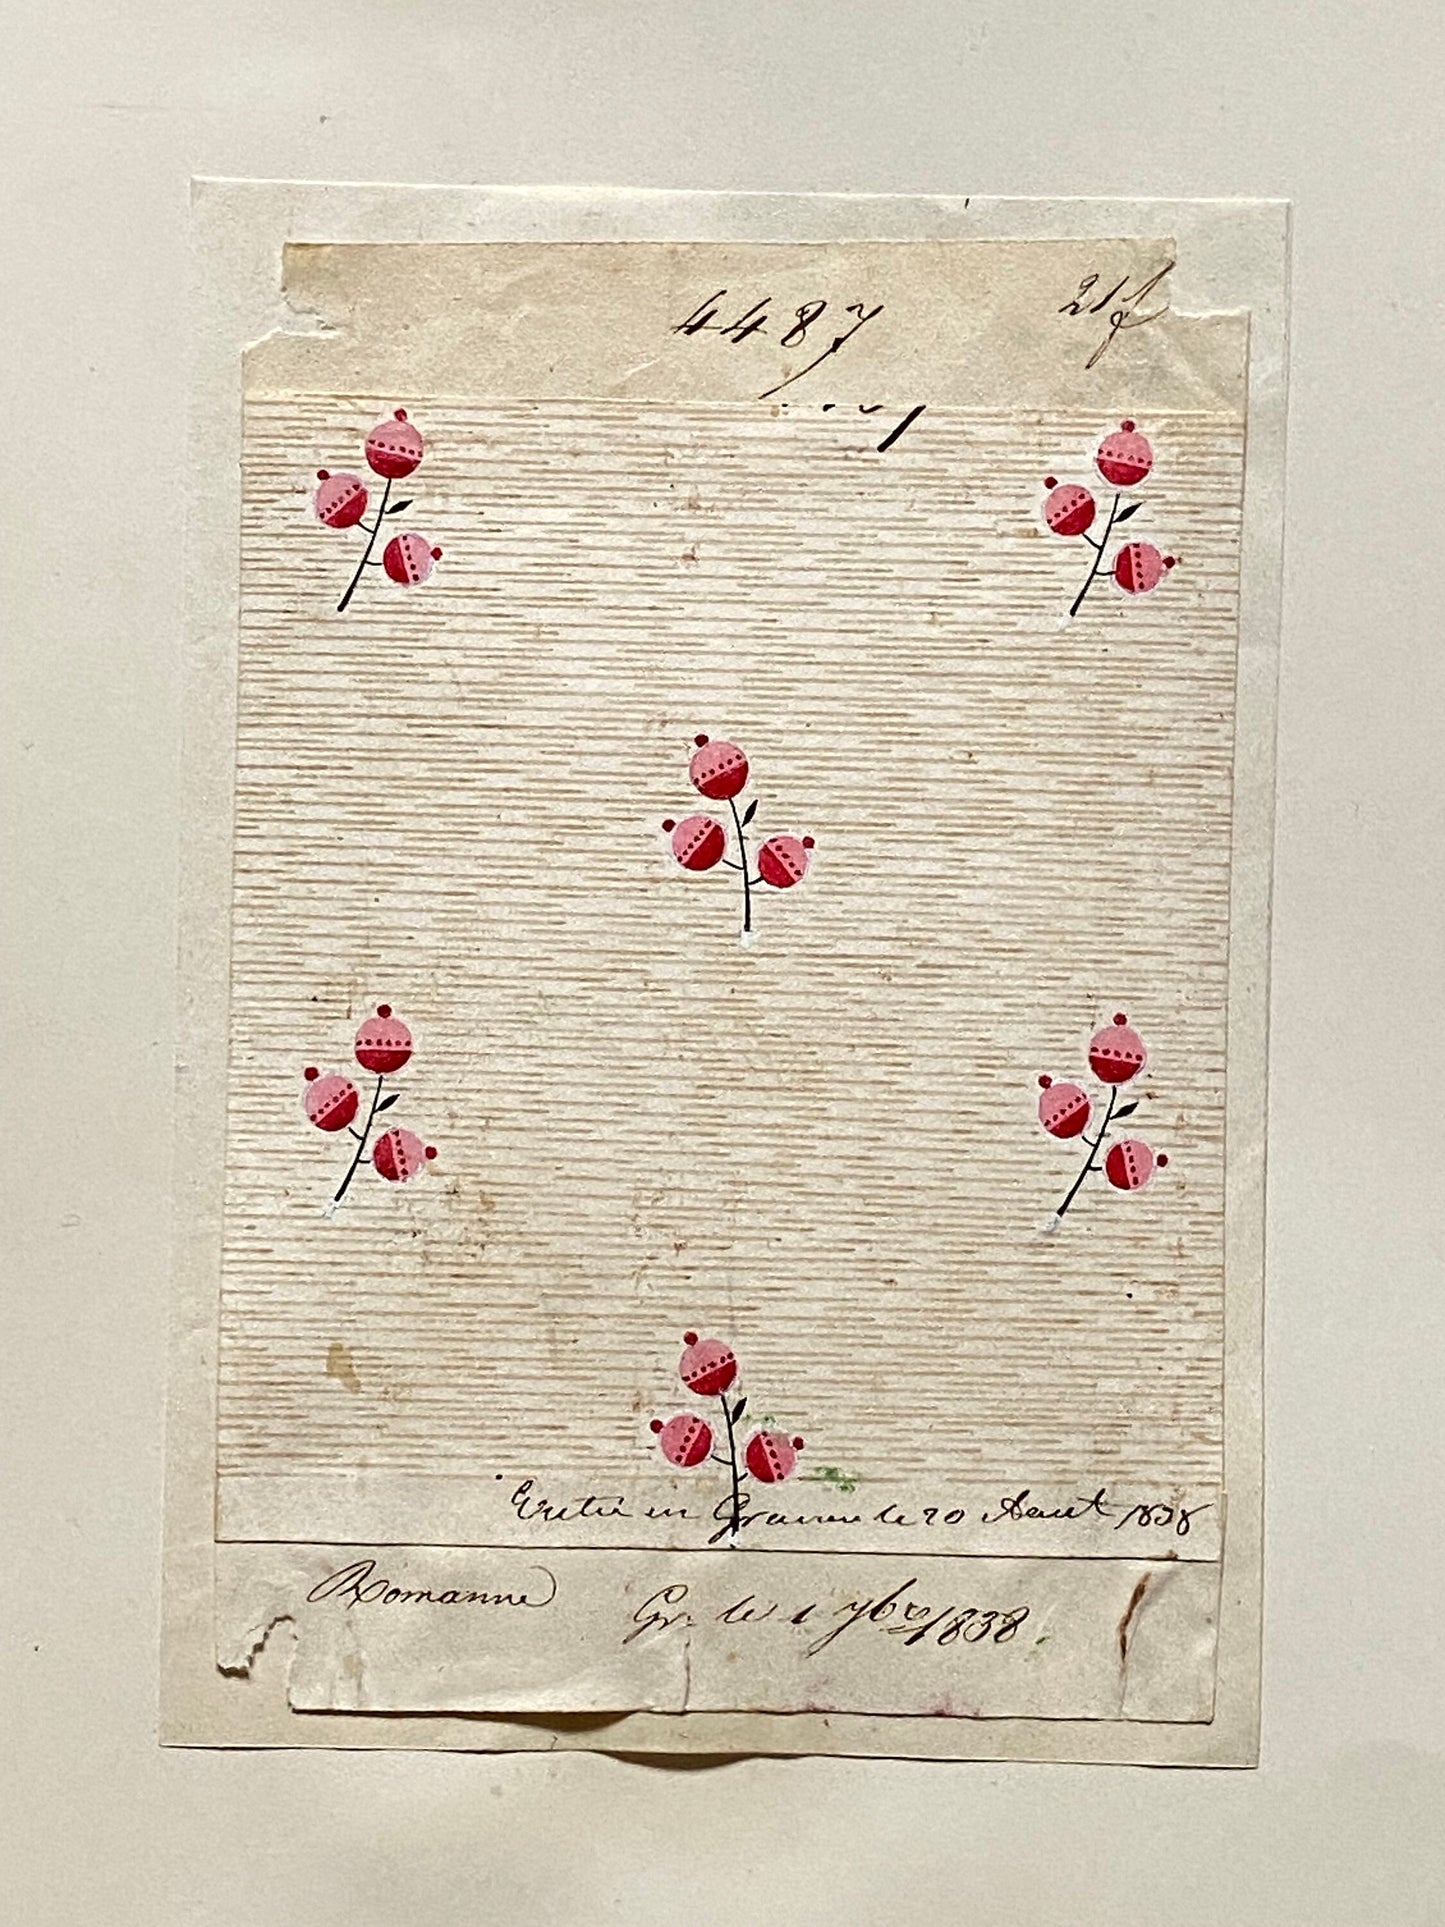 A Genuine 19th Century French Textile Design. Dated 1838. Mounted on Antique Paper. Size: 9.2 x 13.5 cms.